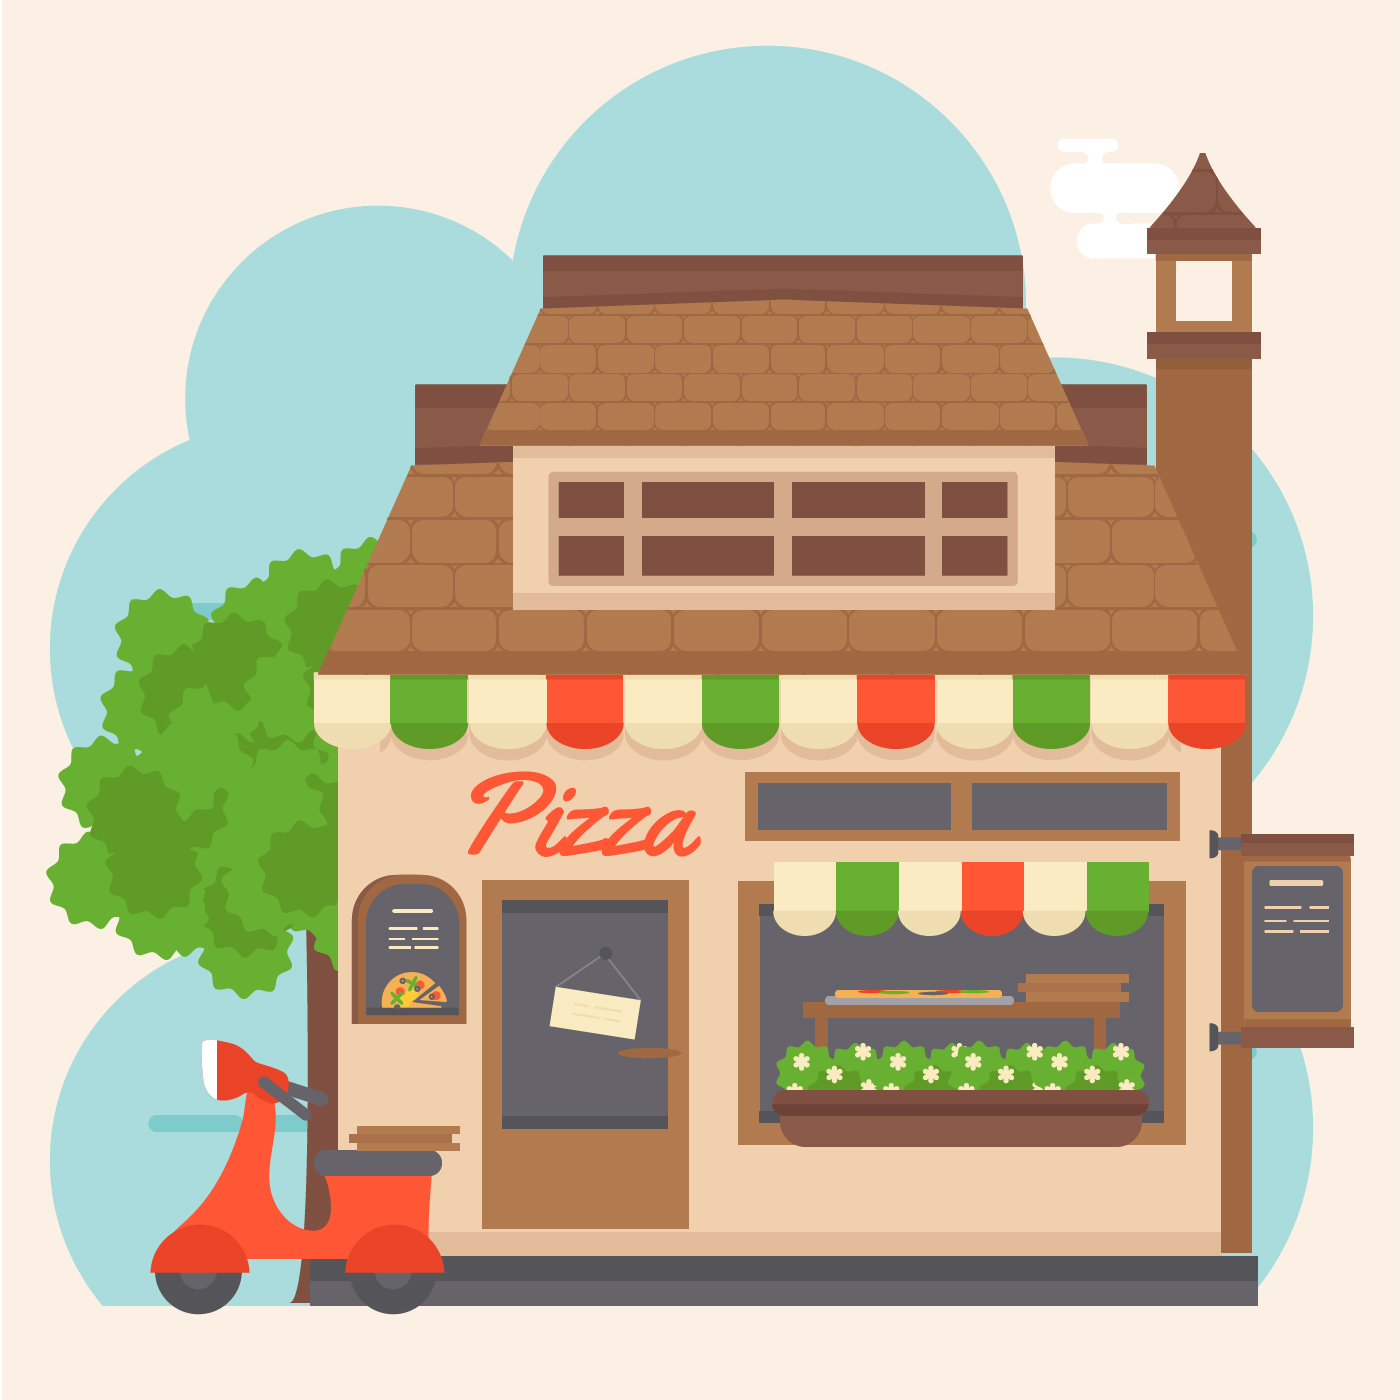 THE pizza place - Home